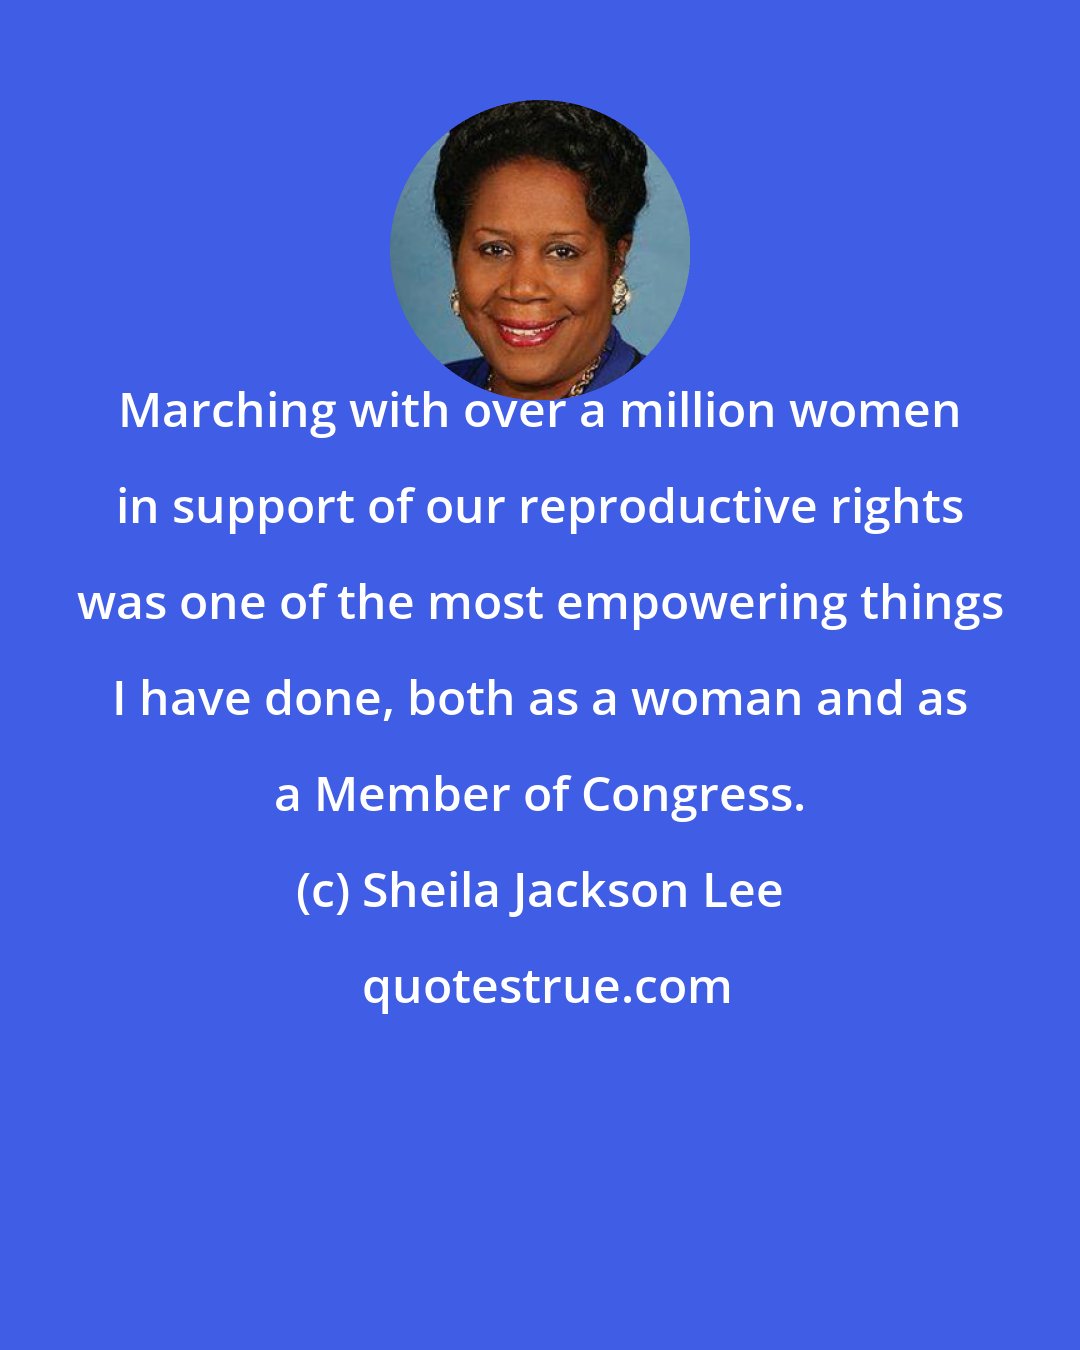 Sheila Jackson Lee: Marching with over a million women in support of our reproductive rights was one of the most empowering things I have done, both as a woman and as a Member of Congress.